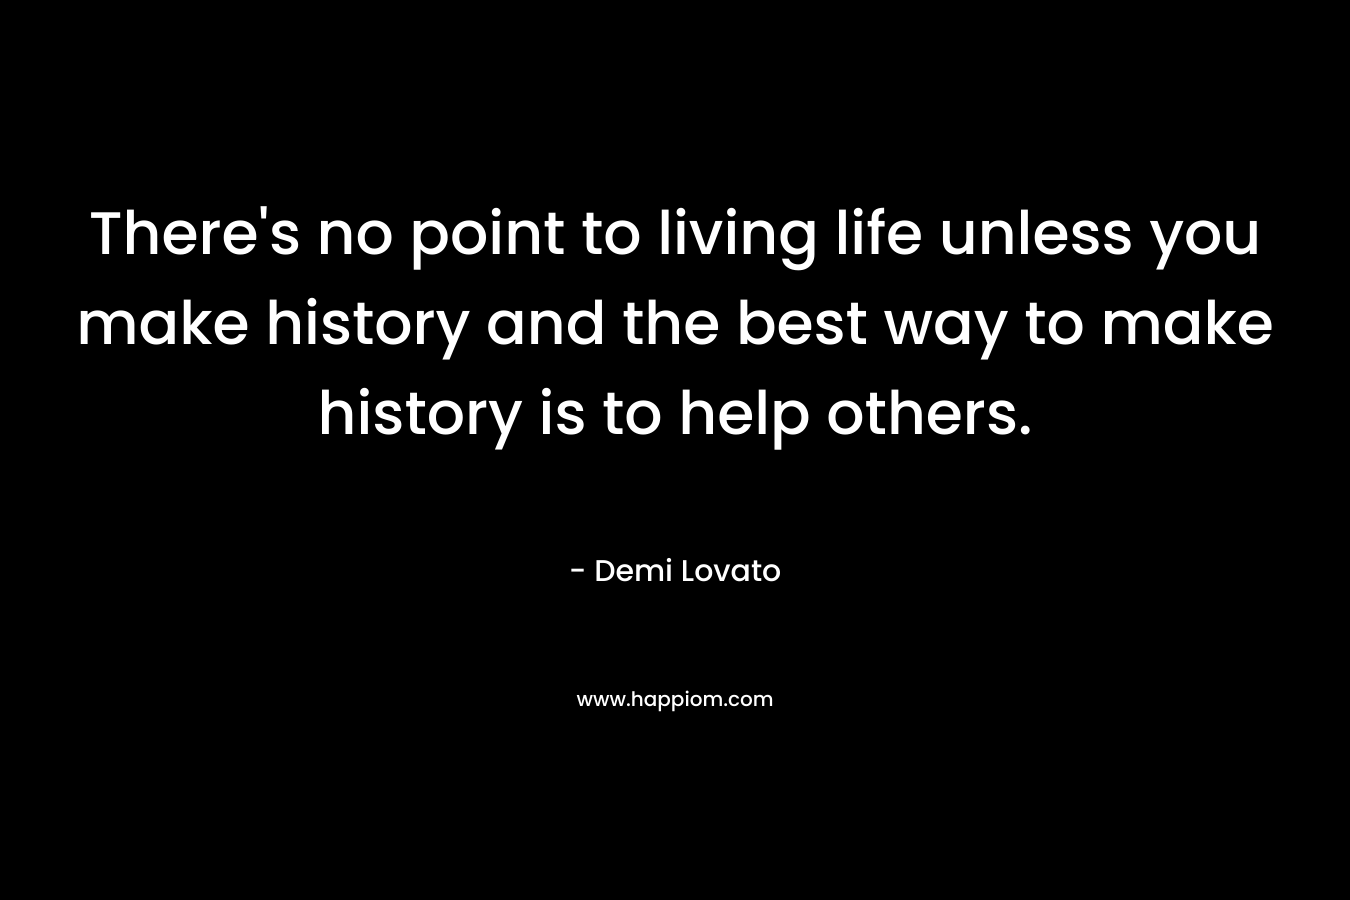 There's no point to living life unless you make history and the best way to make history is to help others.